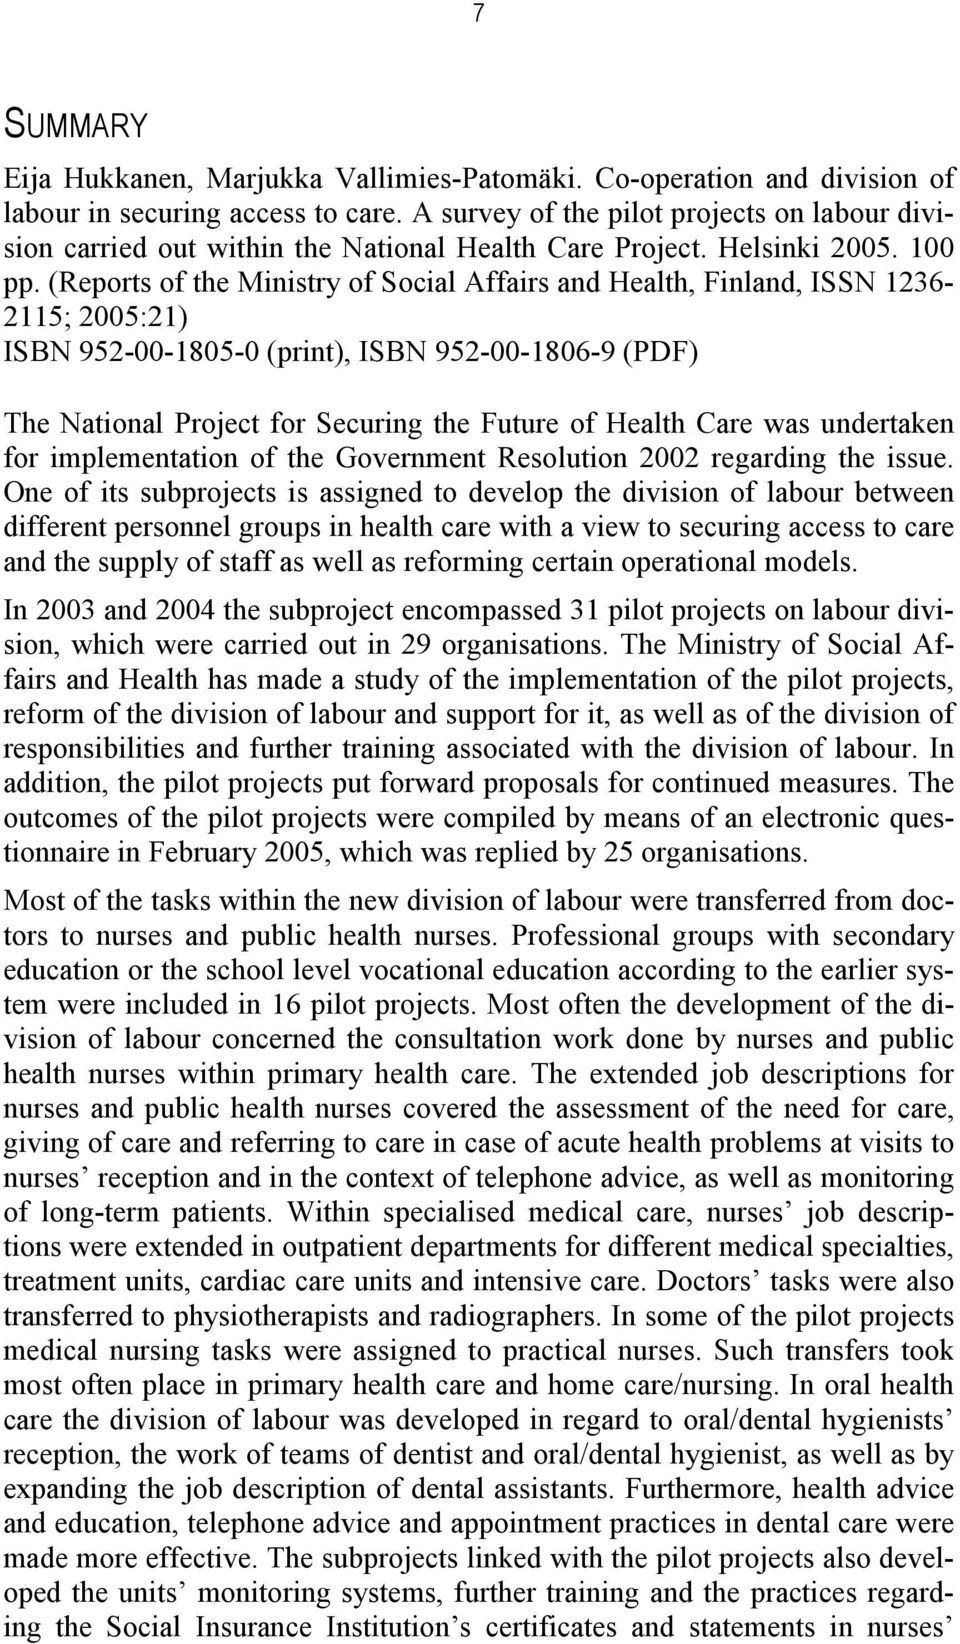 (Reports of the Ministry of Social Affairs and Health, Finland, ISSN 1236-2115; 2005:21) ISBN 952-00-1805-0 (print), ISBN 952-00-1806-9 (PDF) The National Project for Securing the Future of Health